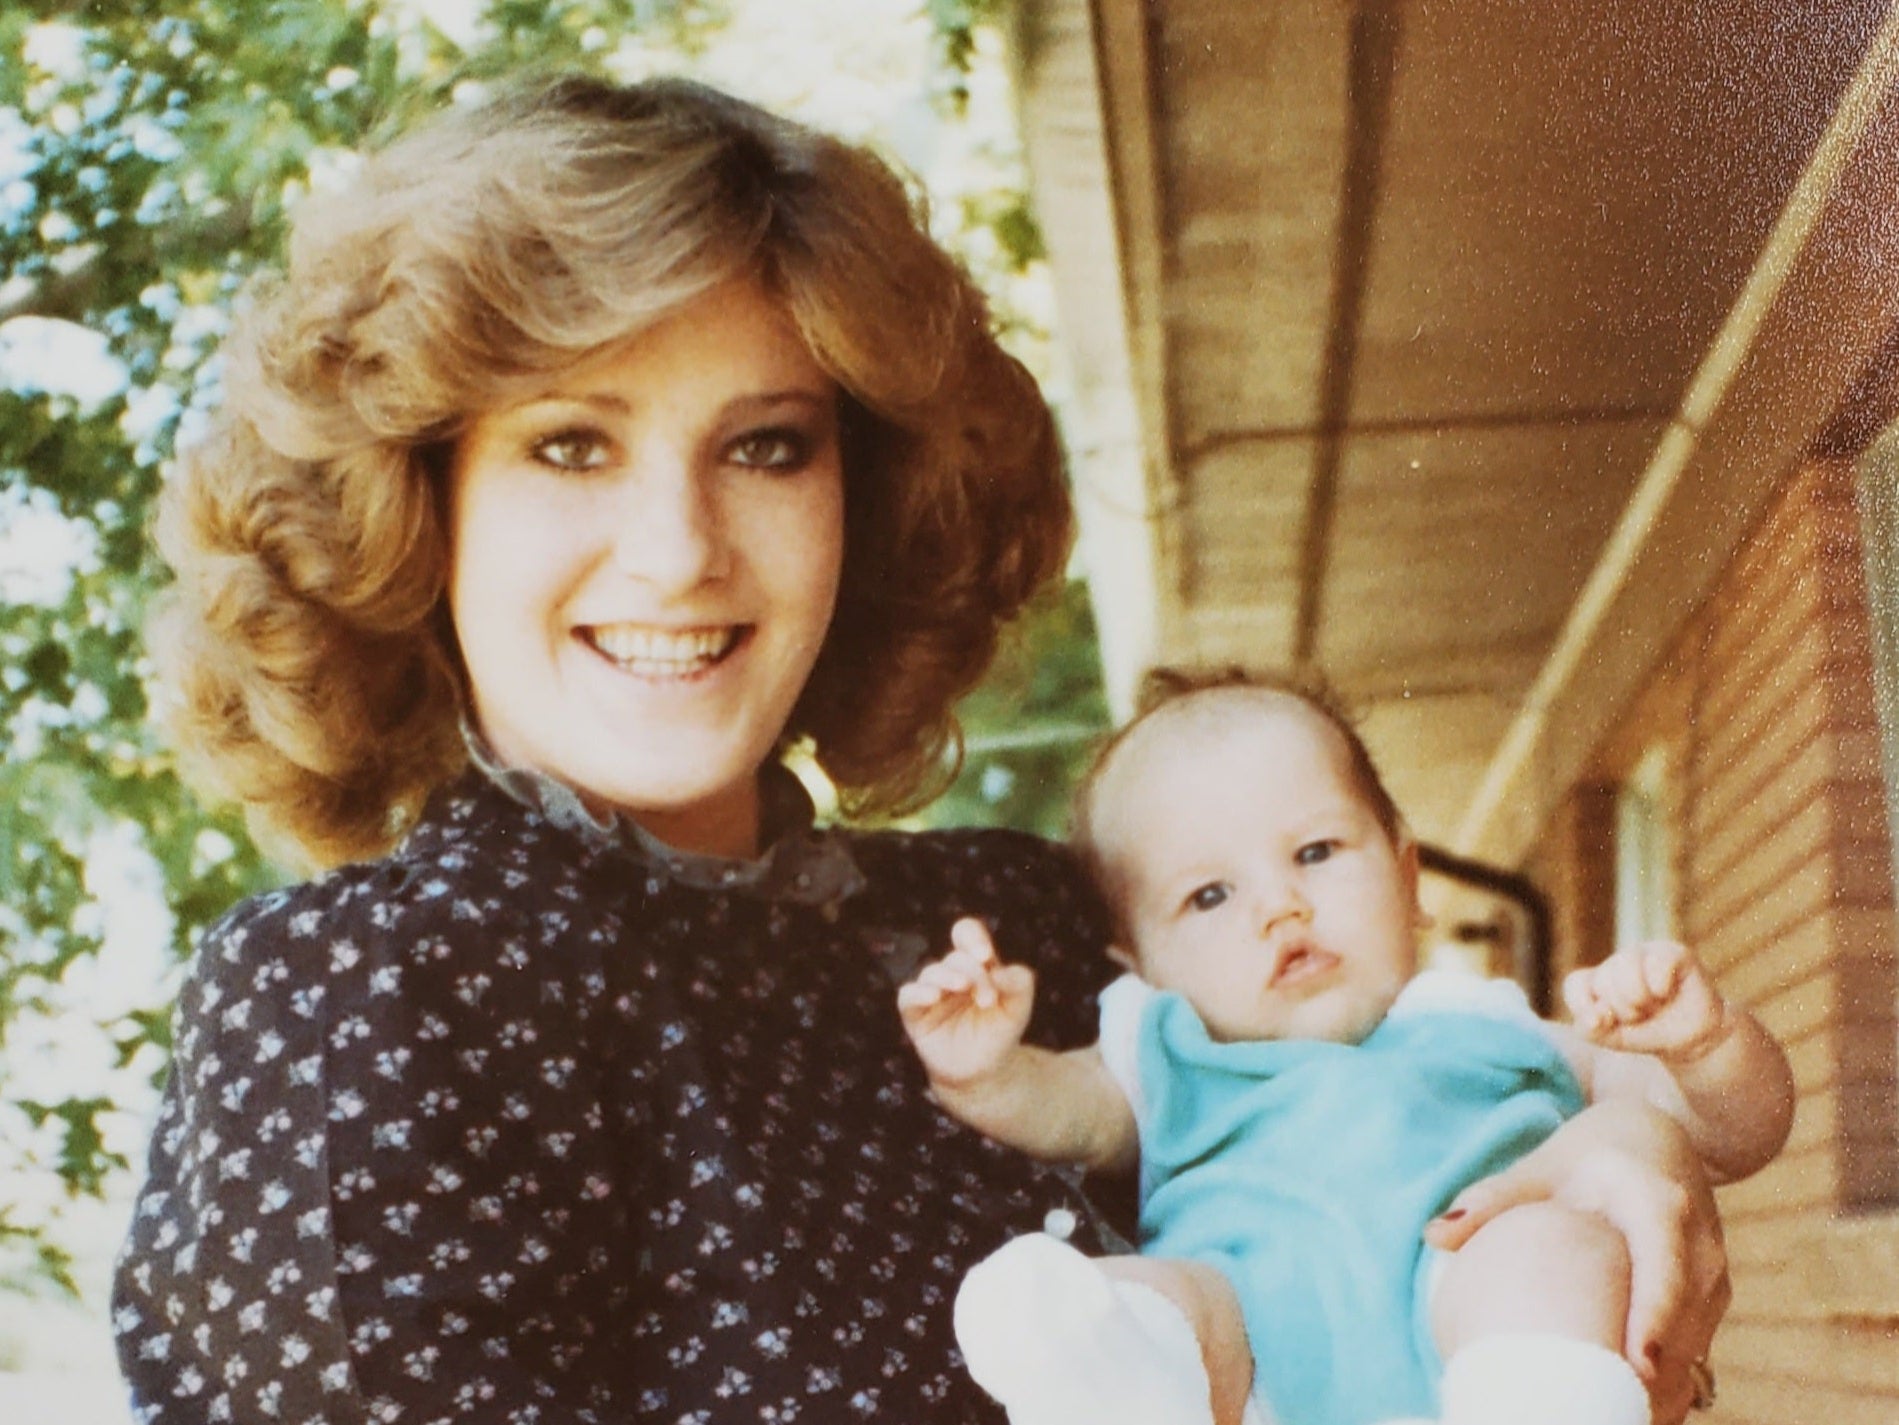 A family photo of Brenda Wright Lafferty and her daughter Erica, who were murdered in 1984